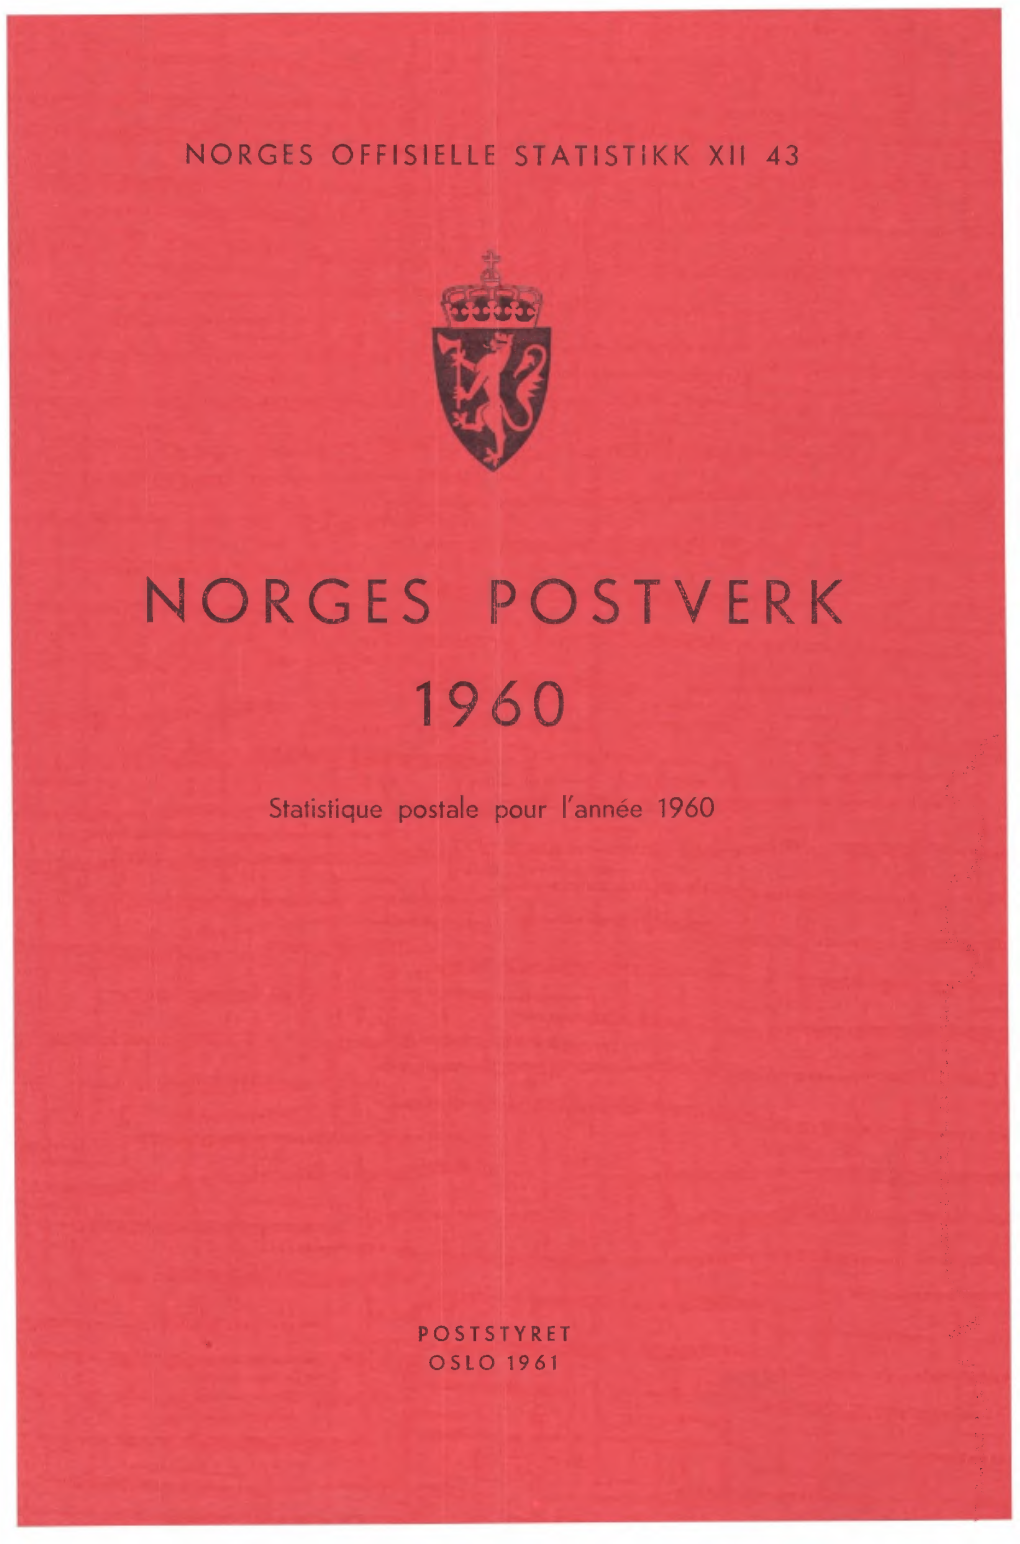 Norges Postverk 1960 Statistique Postale �O�GES O��ISIE��E S�A�IS�IKK �II 4